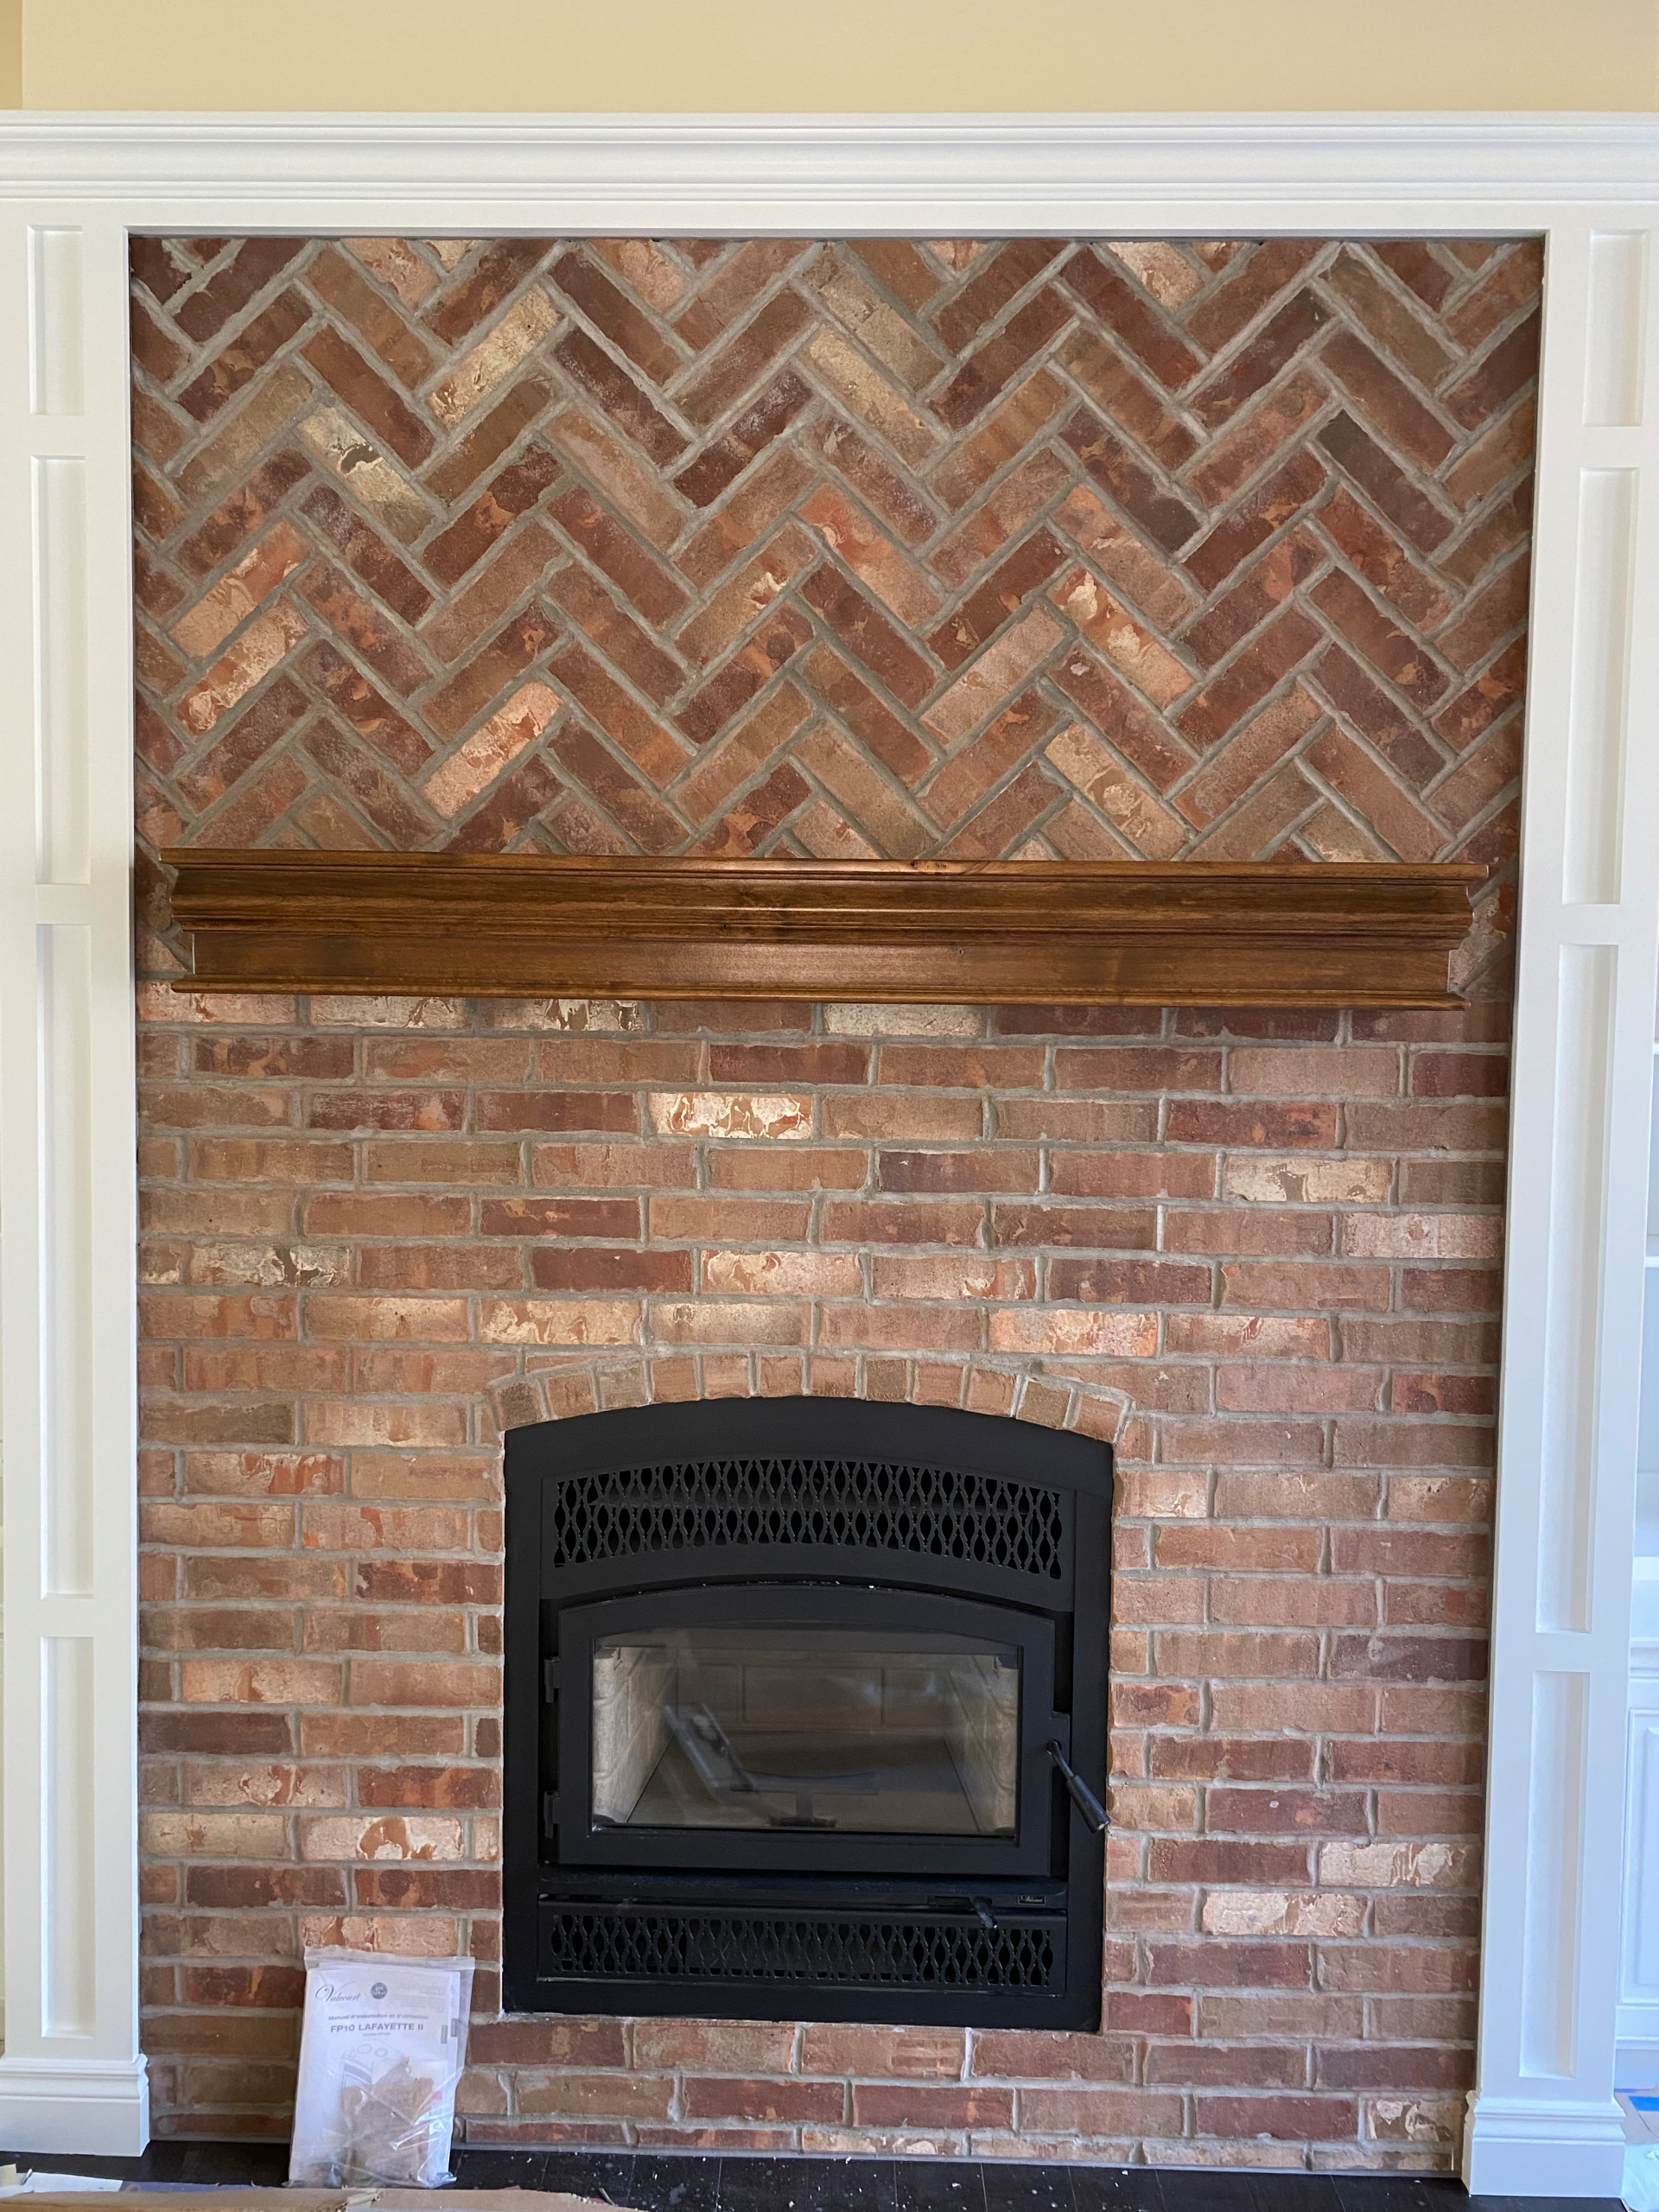 Wood burning fireplace with brick front detail